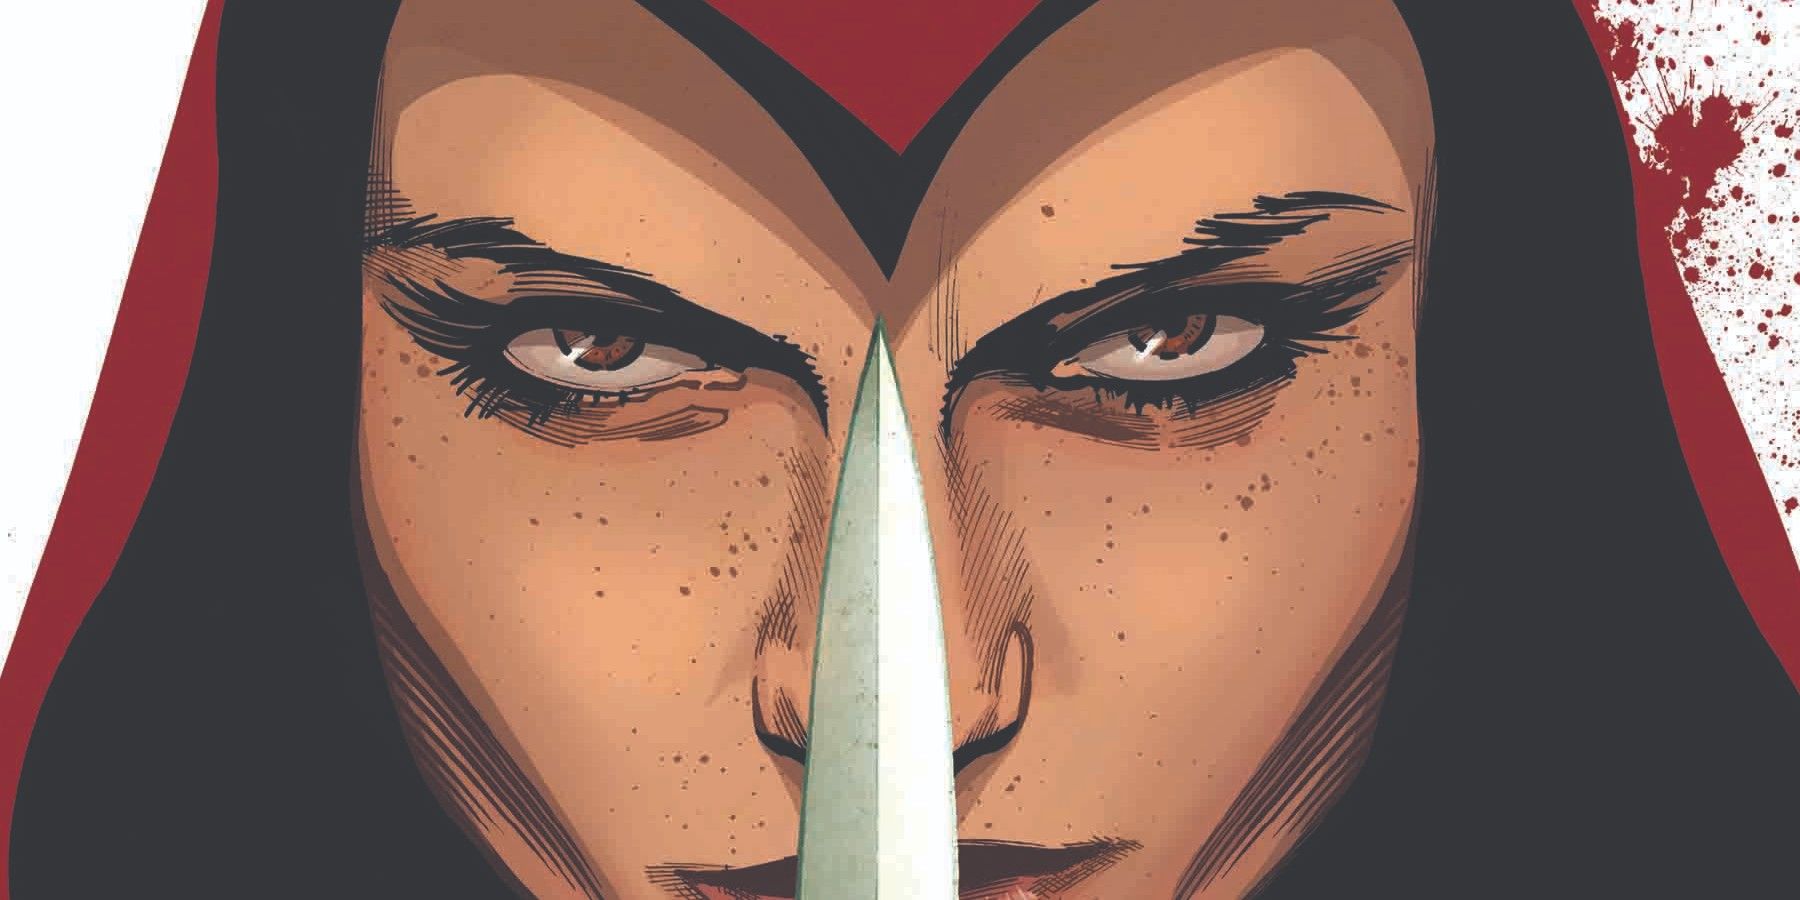 Assassin's Creed comic book cover